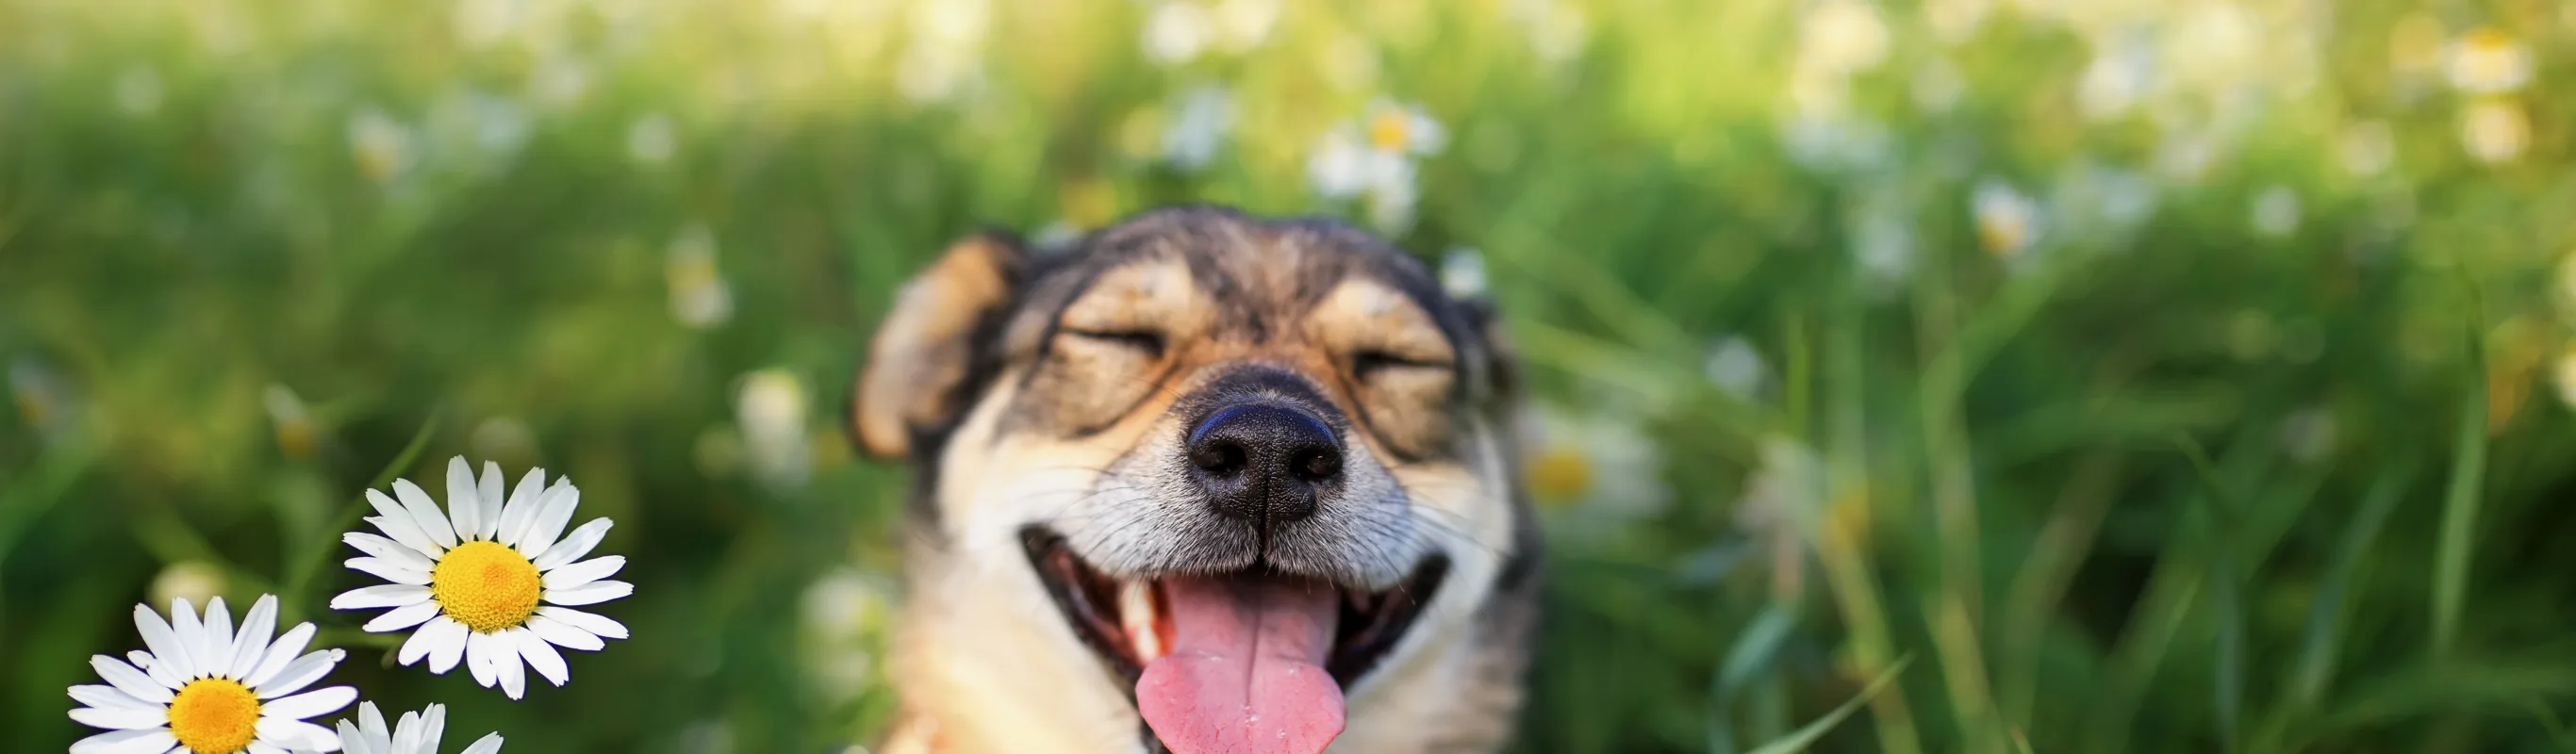 dog smiling in a field of flowers